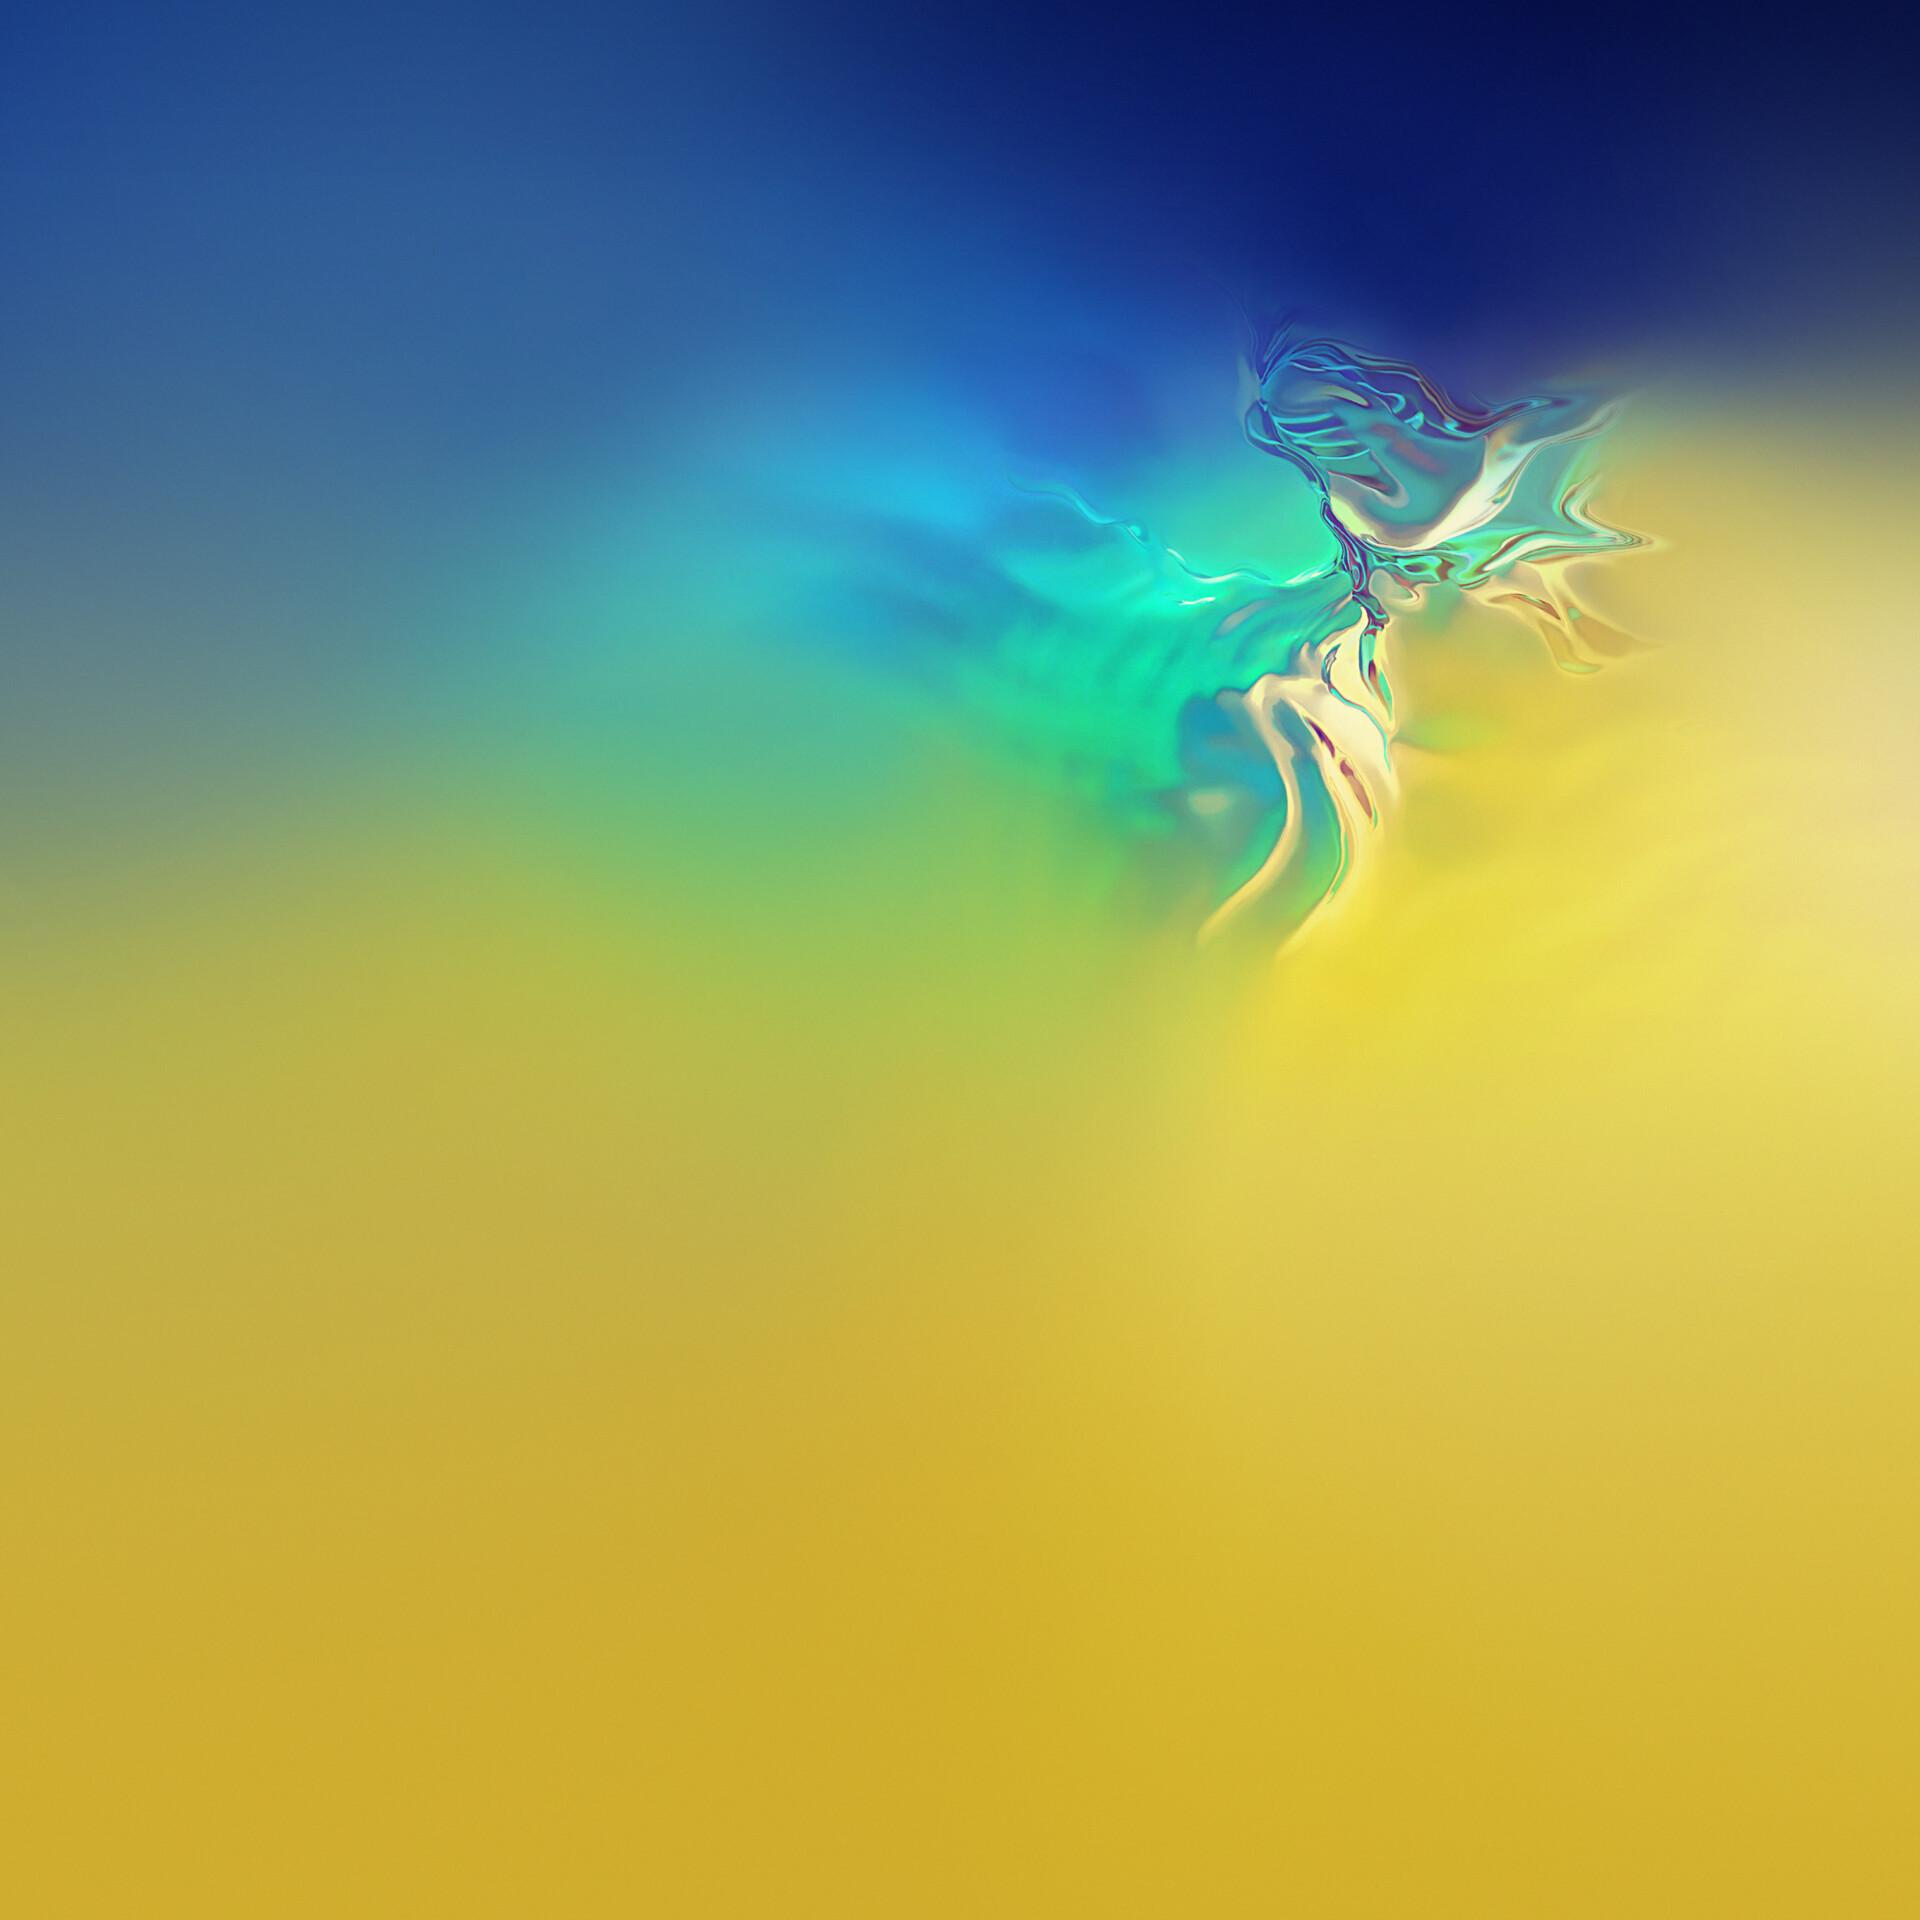 Samsung Galaxy S wallpapers are here Grab them at full resolution